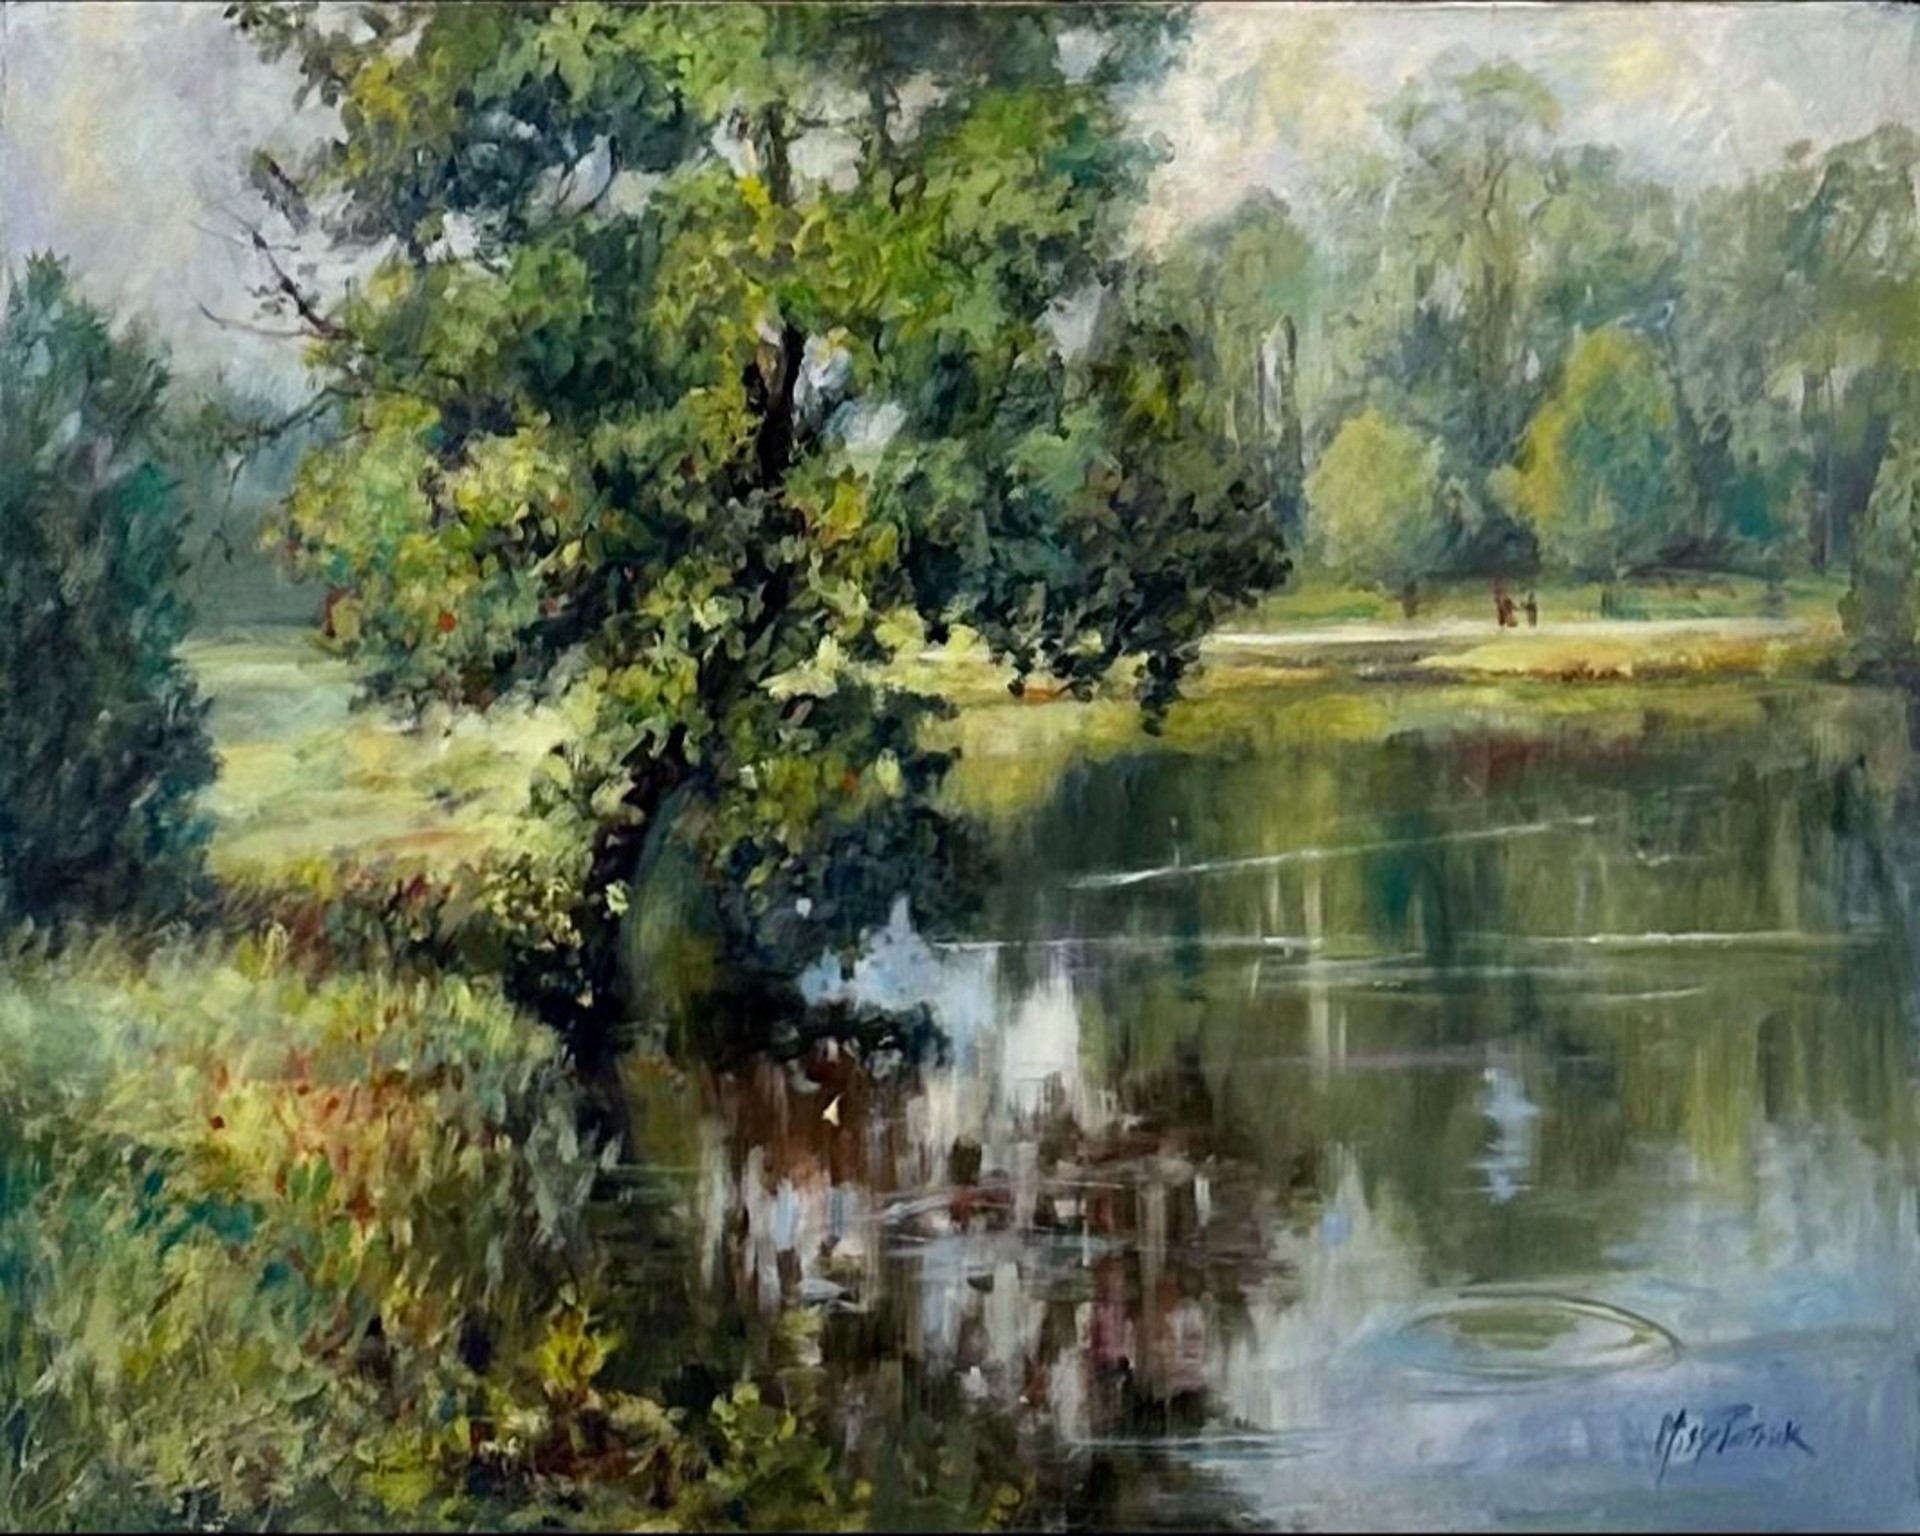 The Pond in Summer by Missy Patrick